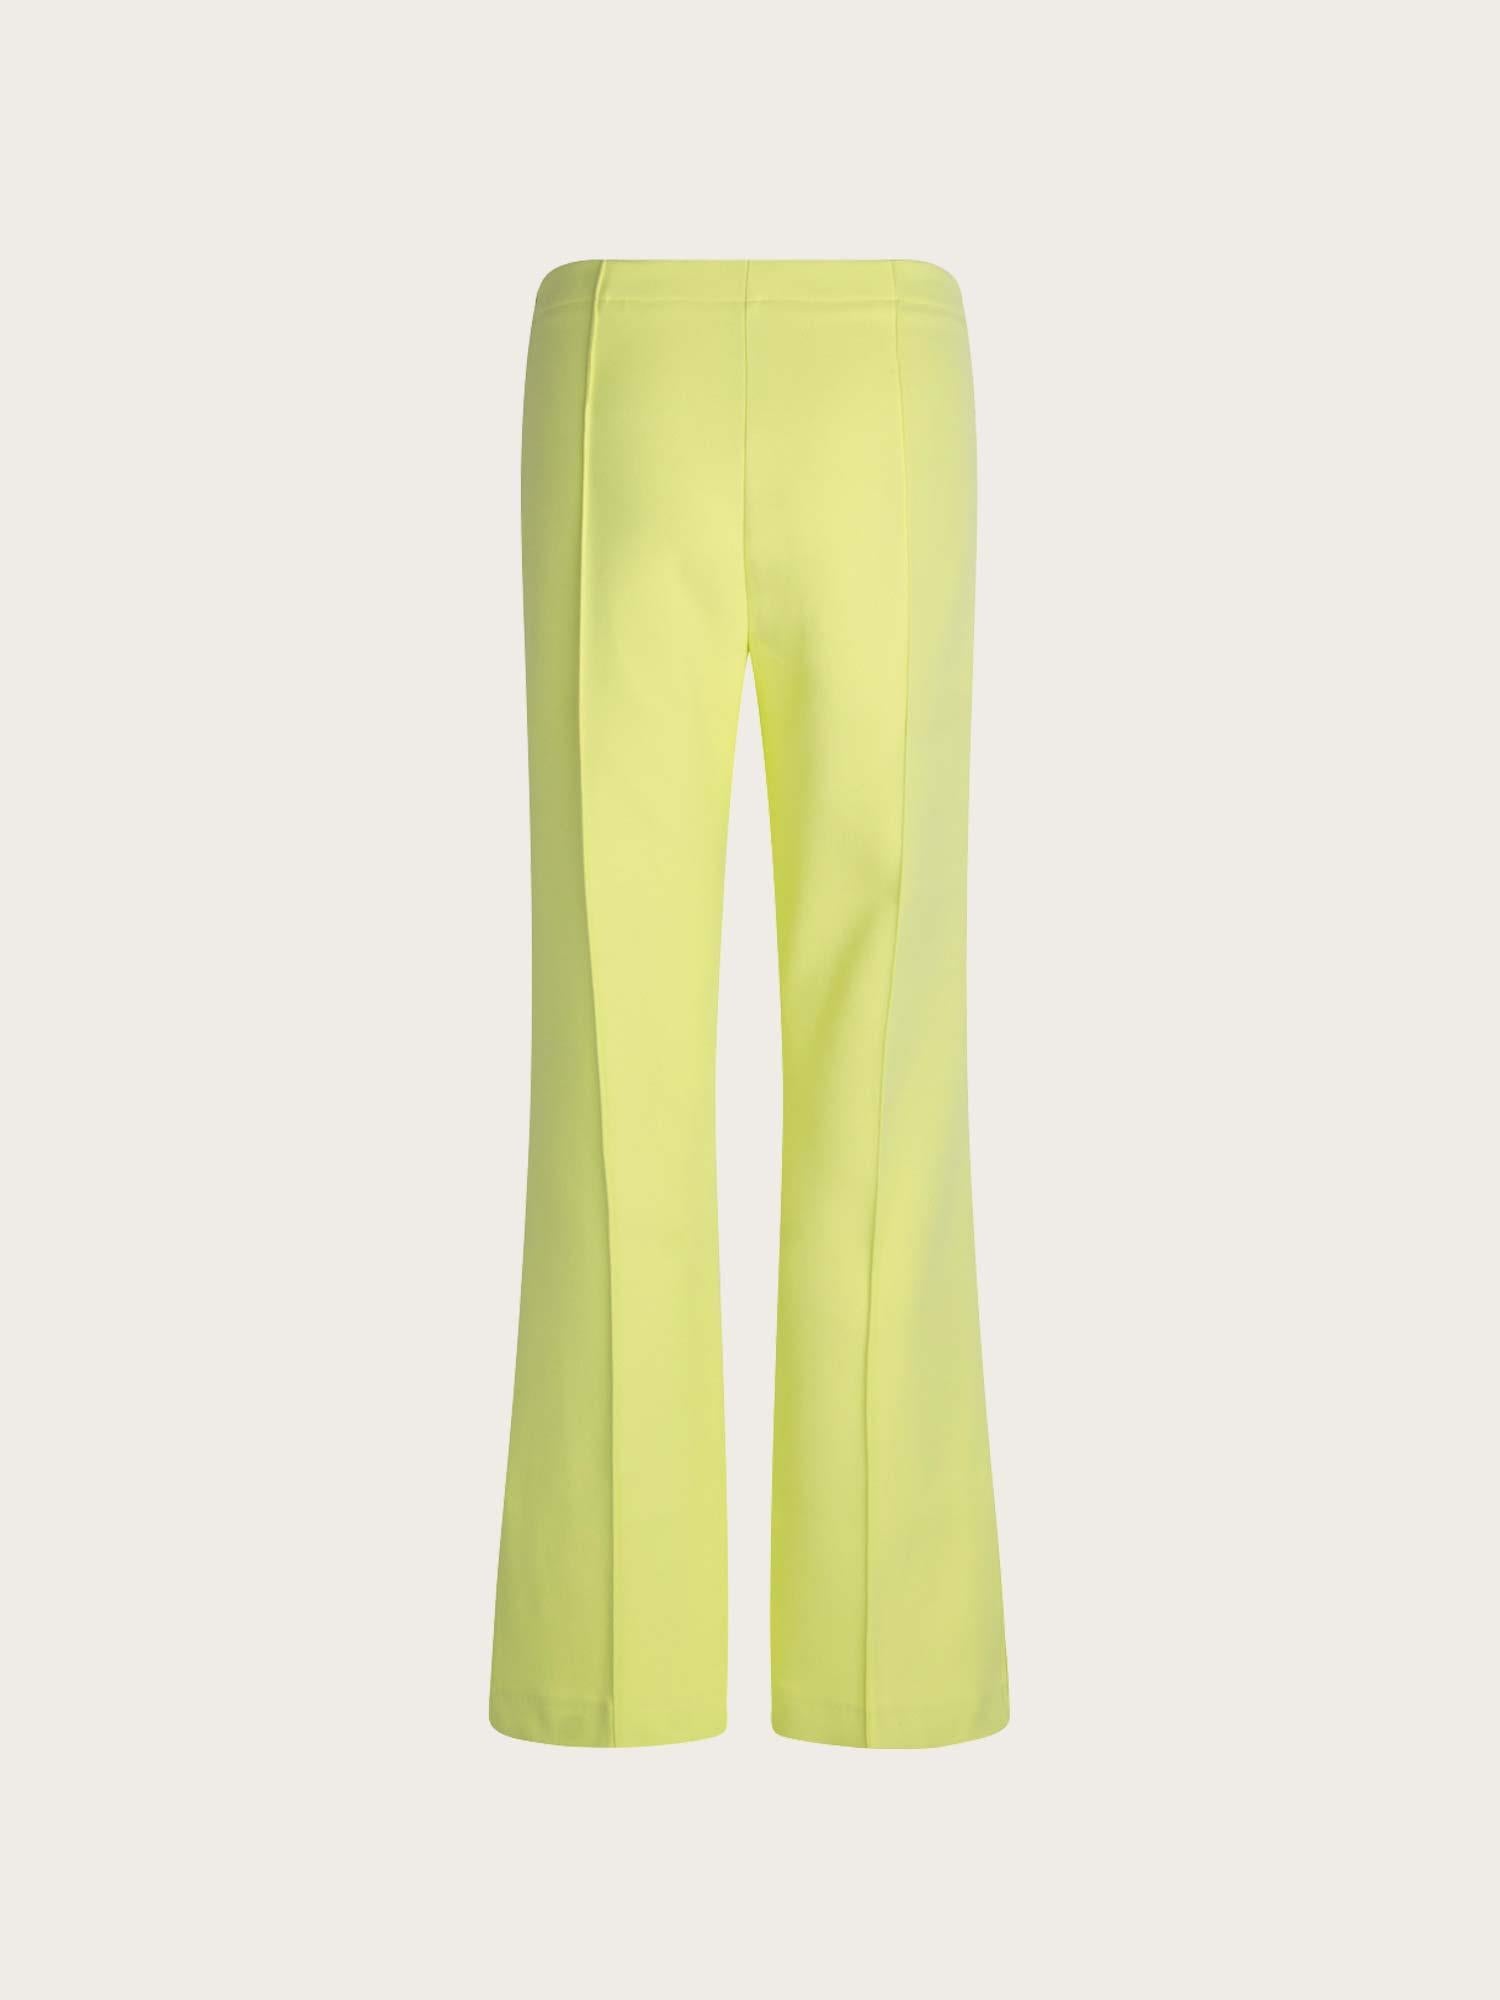 Soft Suiting Peppa Pants - Sunny Lime